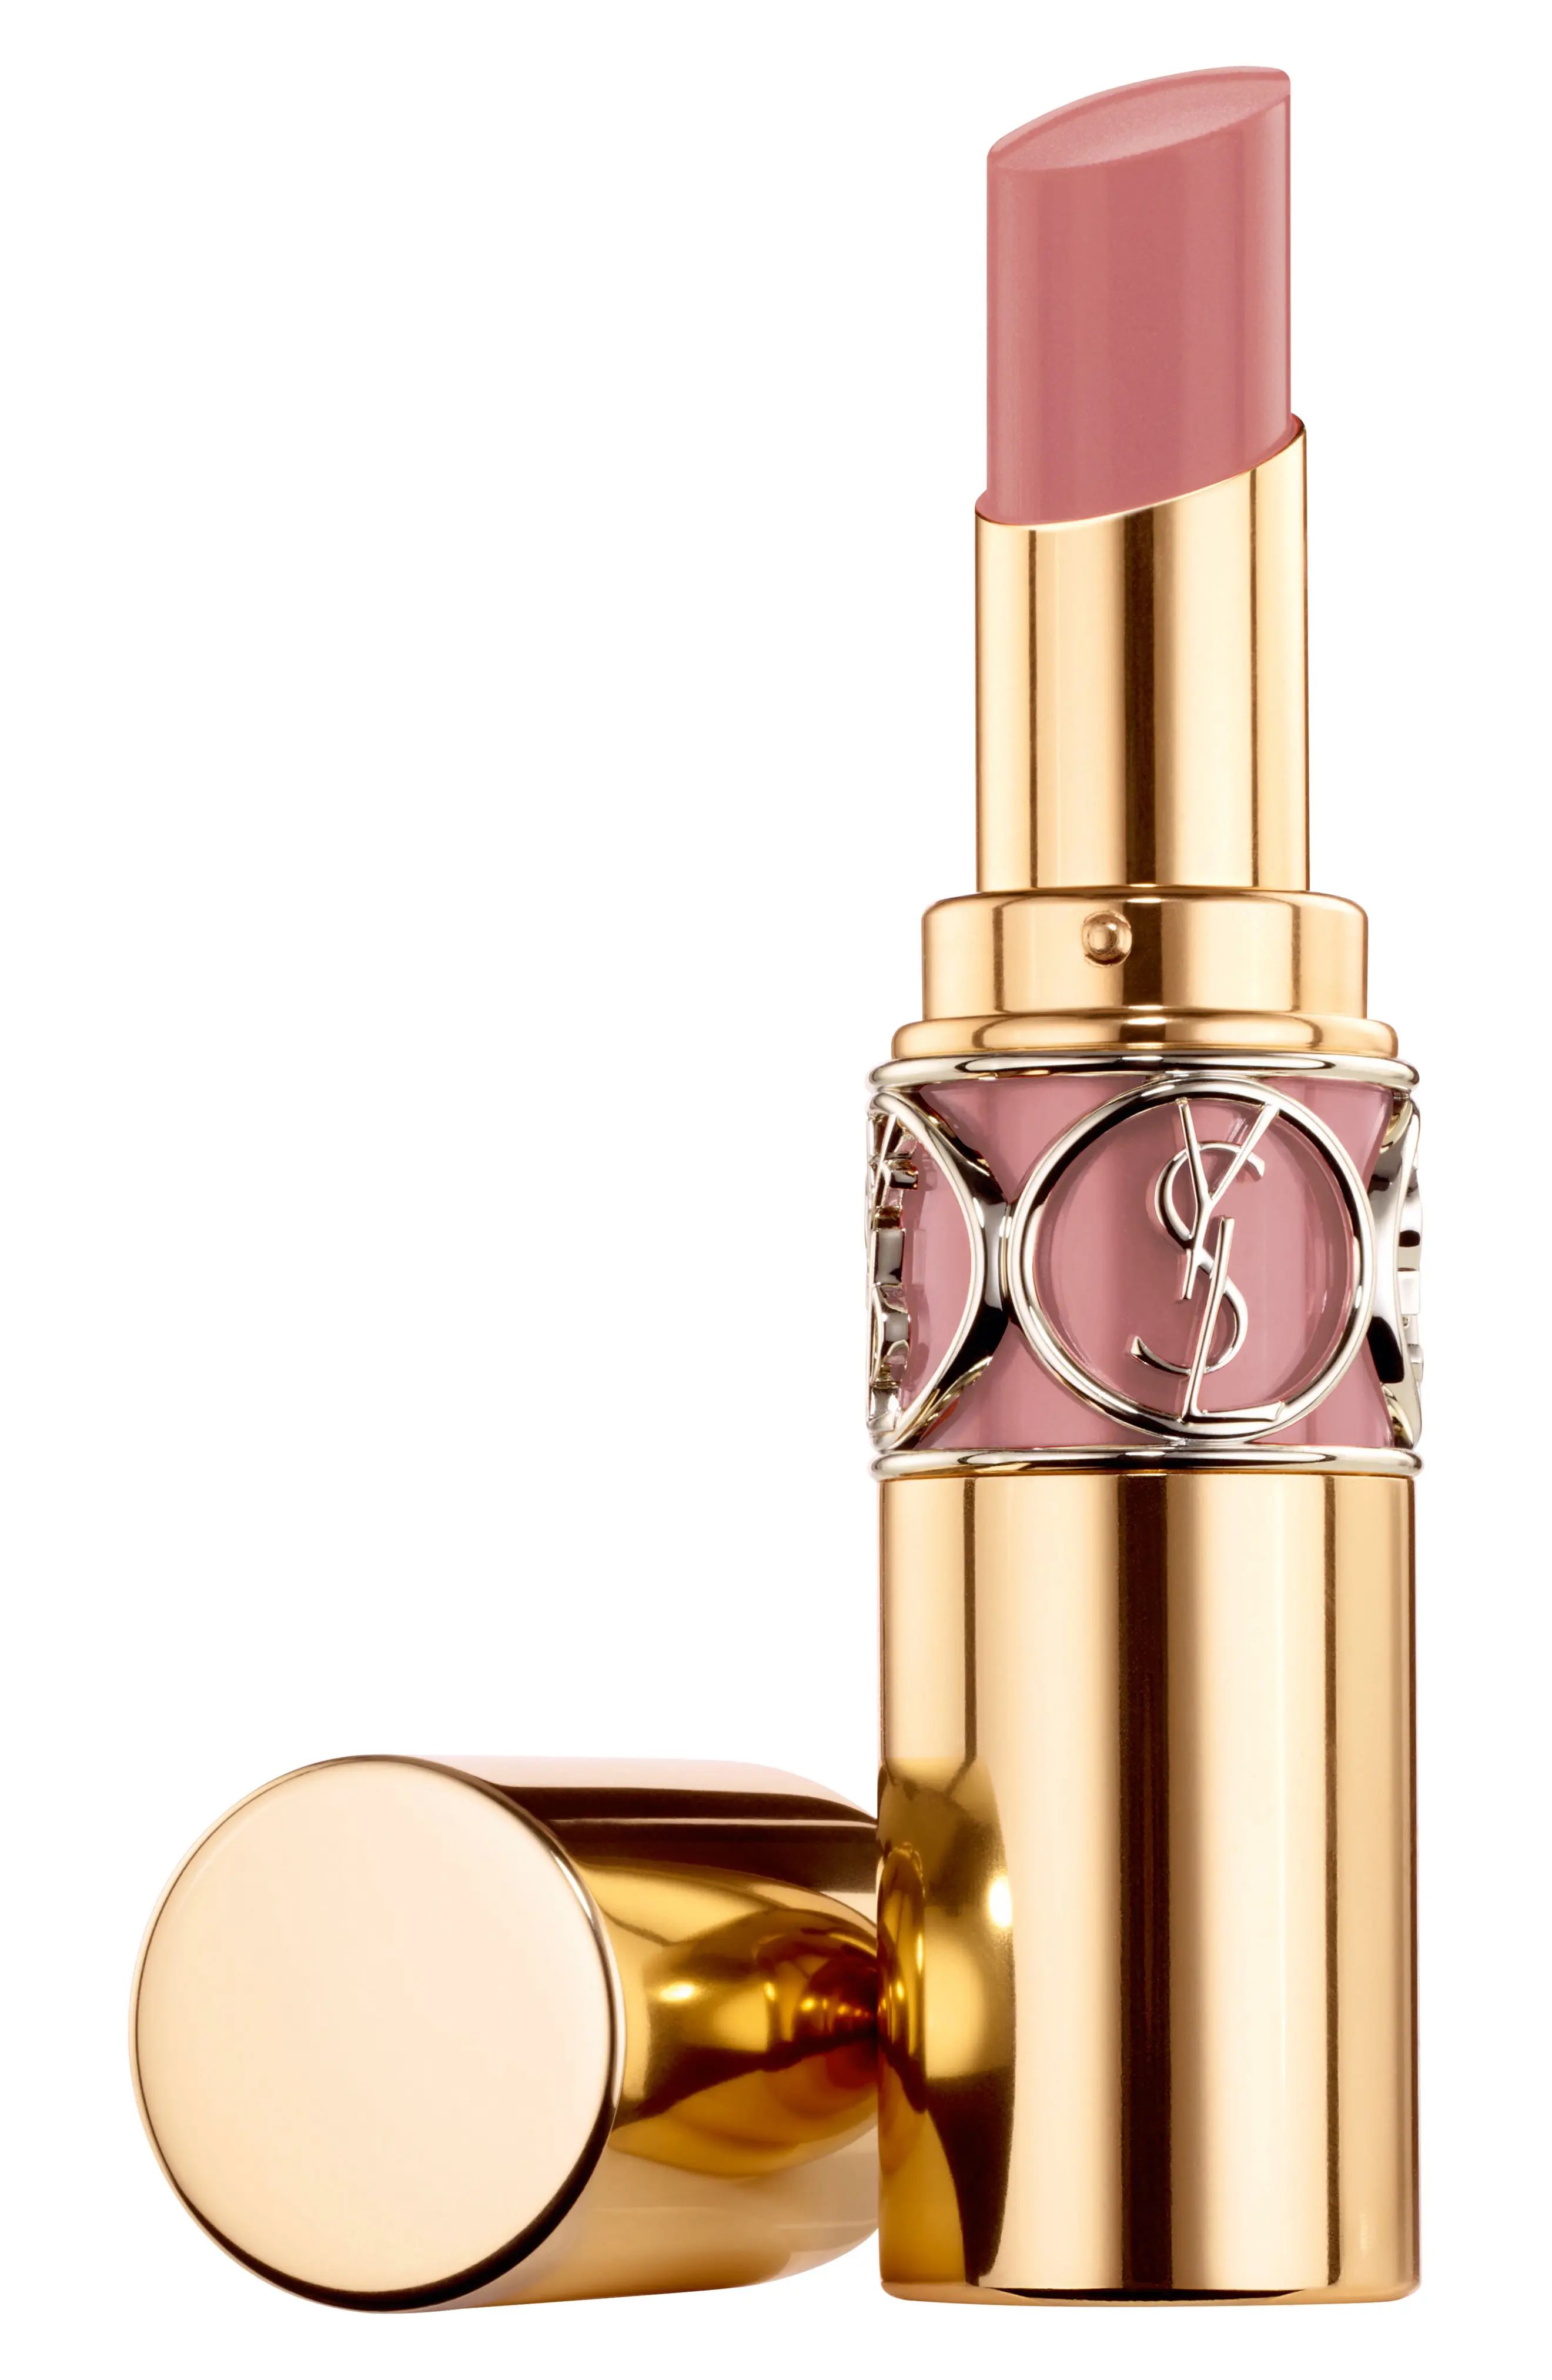 Yves Saint Laurent Rouge Volupte Shine Oil-In-Stick Lipstick - 44 Nude Lavalliere | Nordstrom